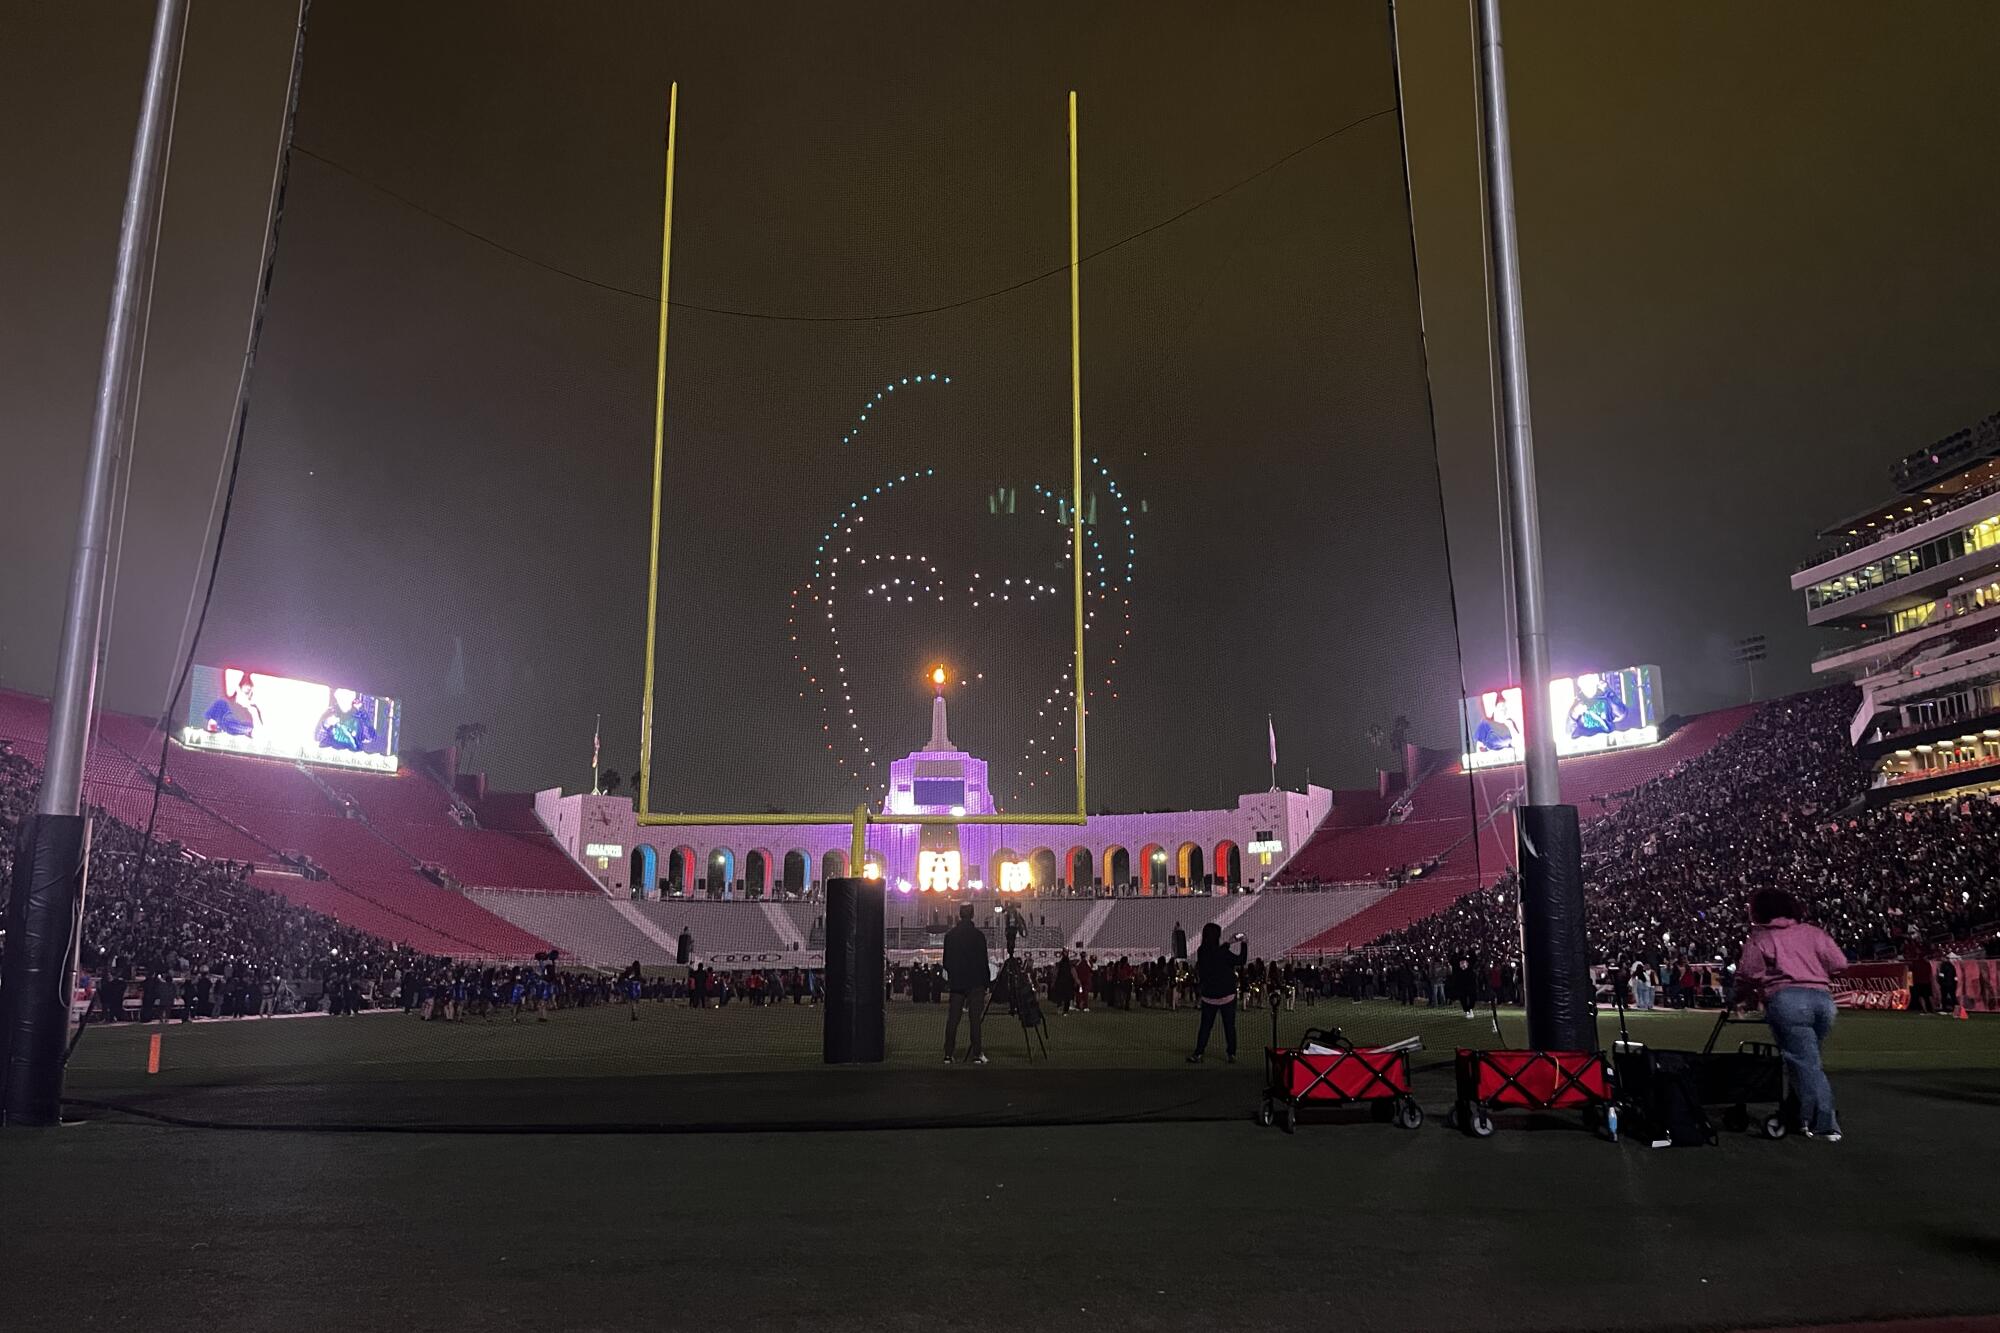 Drones with lights form the shape of a face at a halftime show.